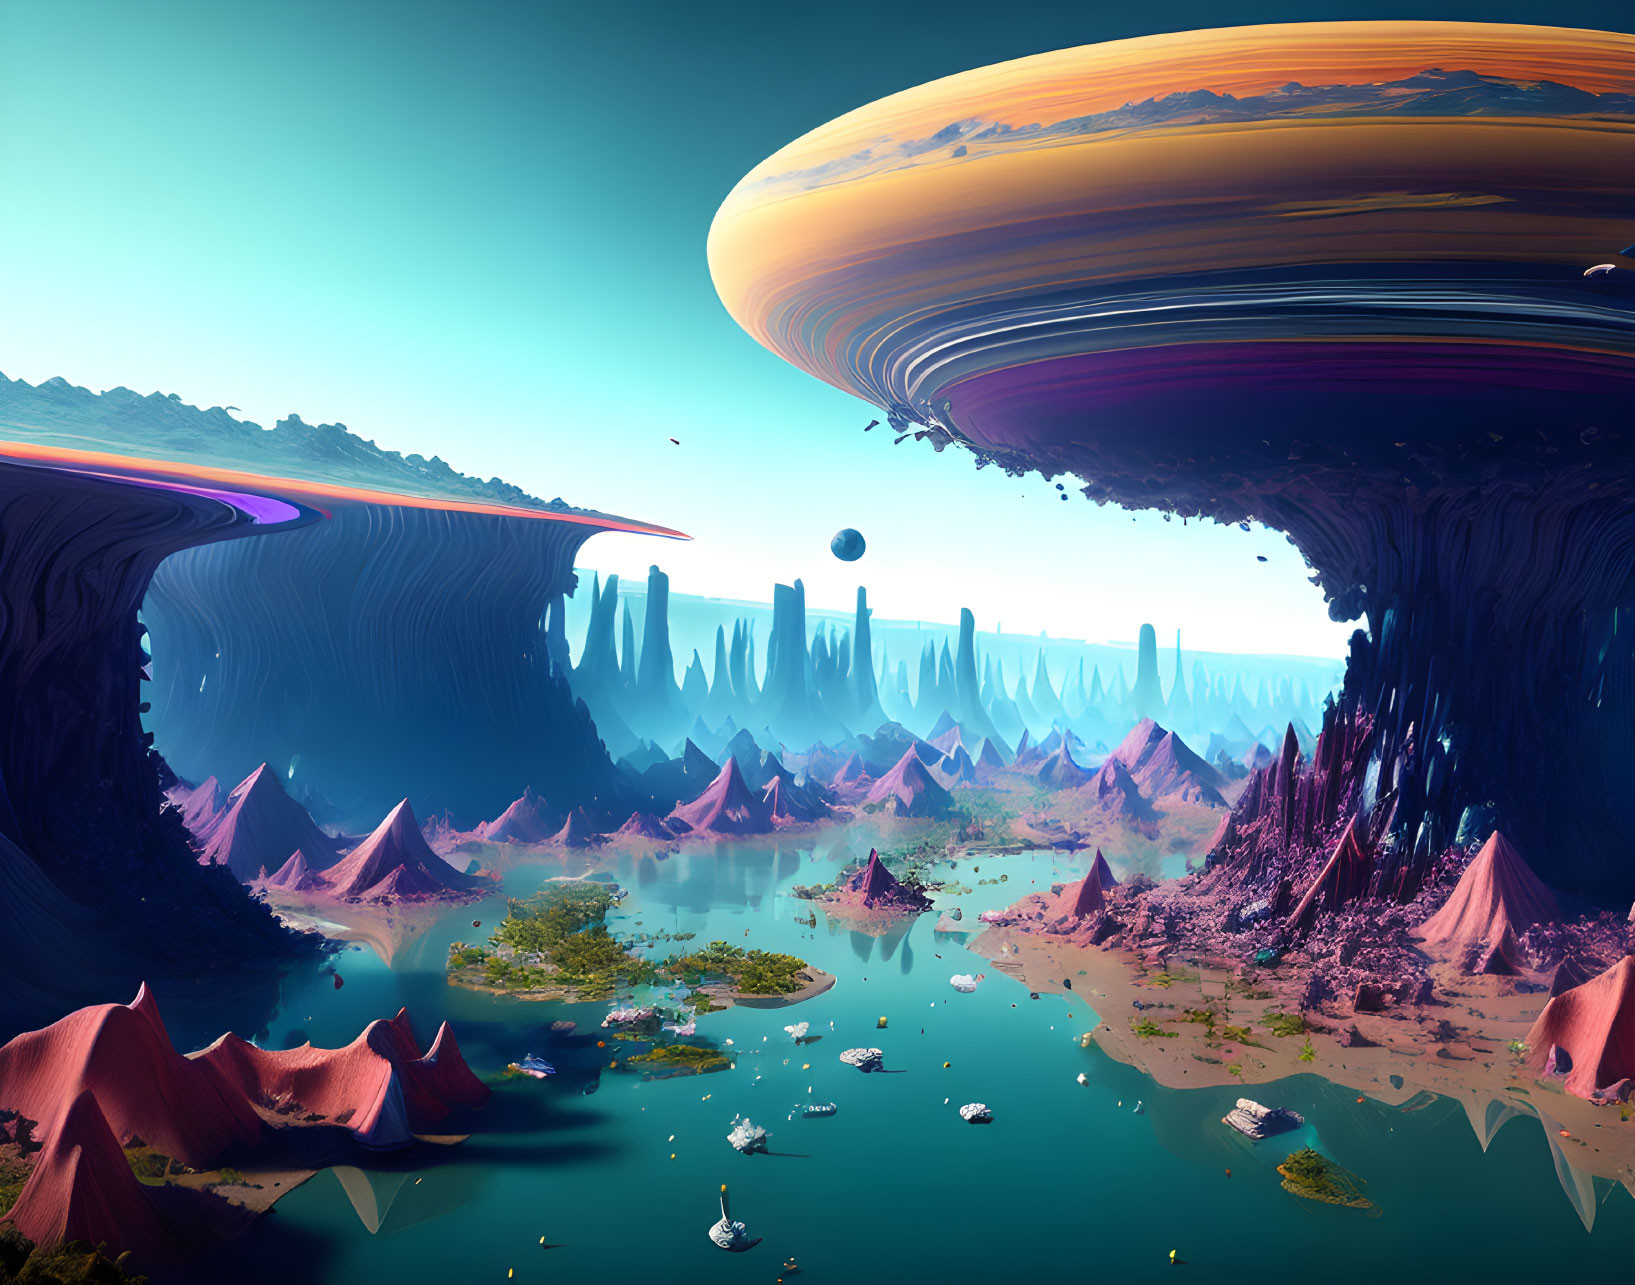 Alien landscape with rock formations, lake, colorful scenery & ringed planets